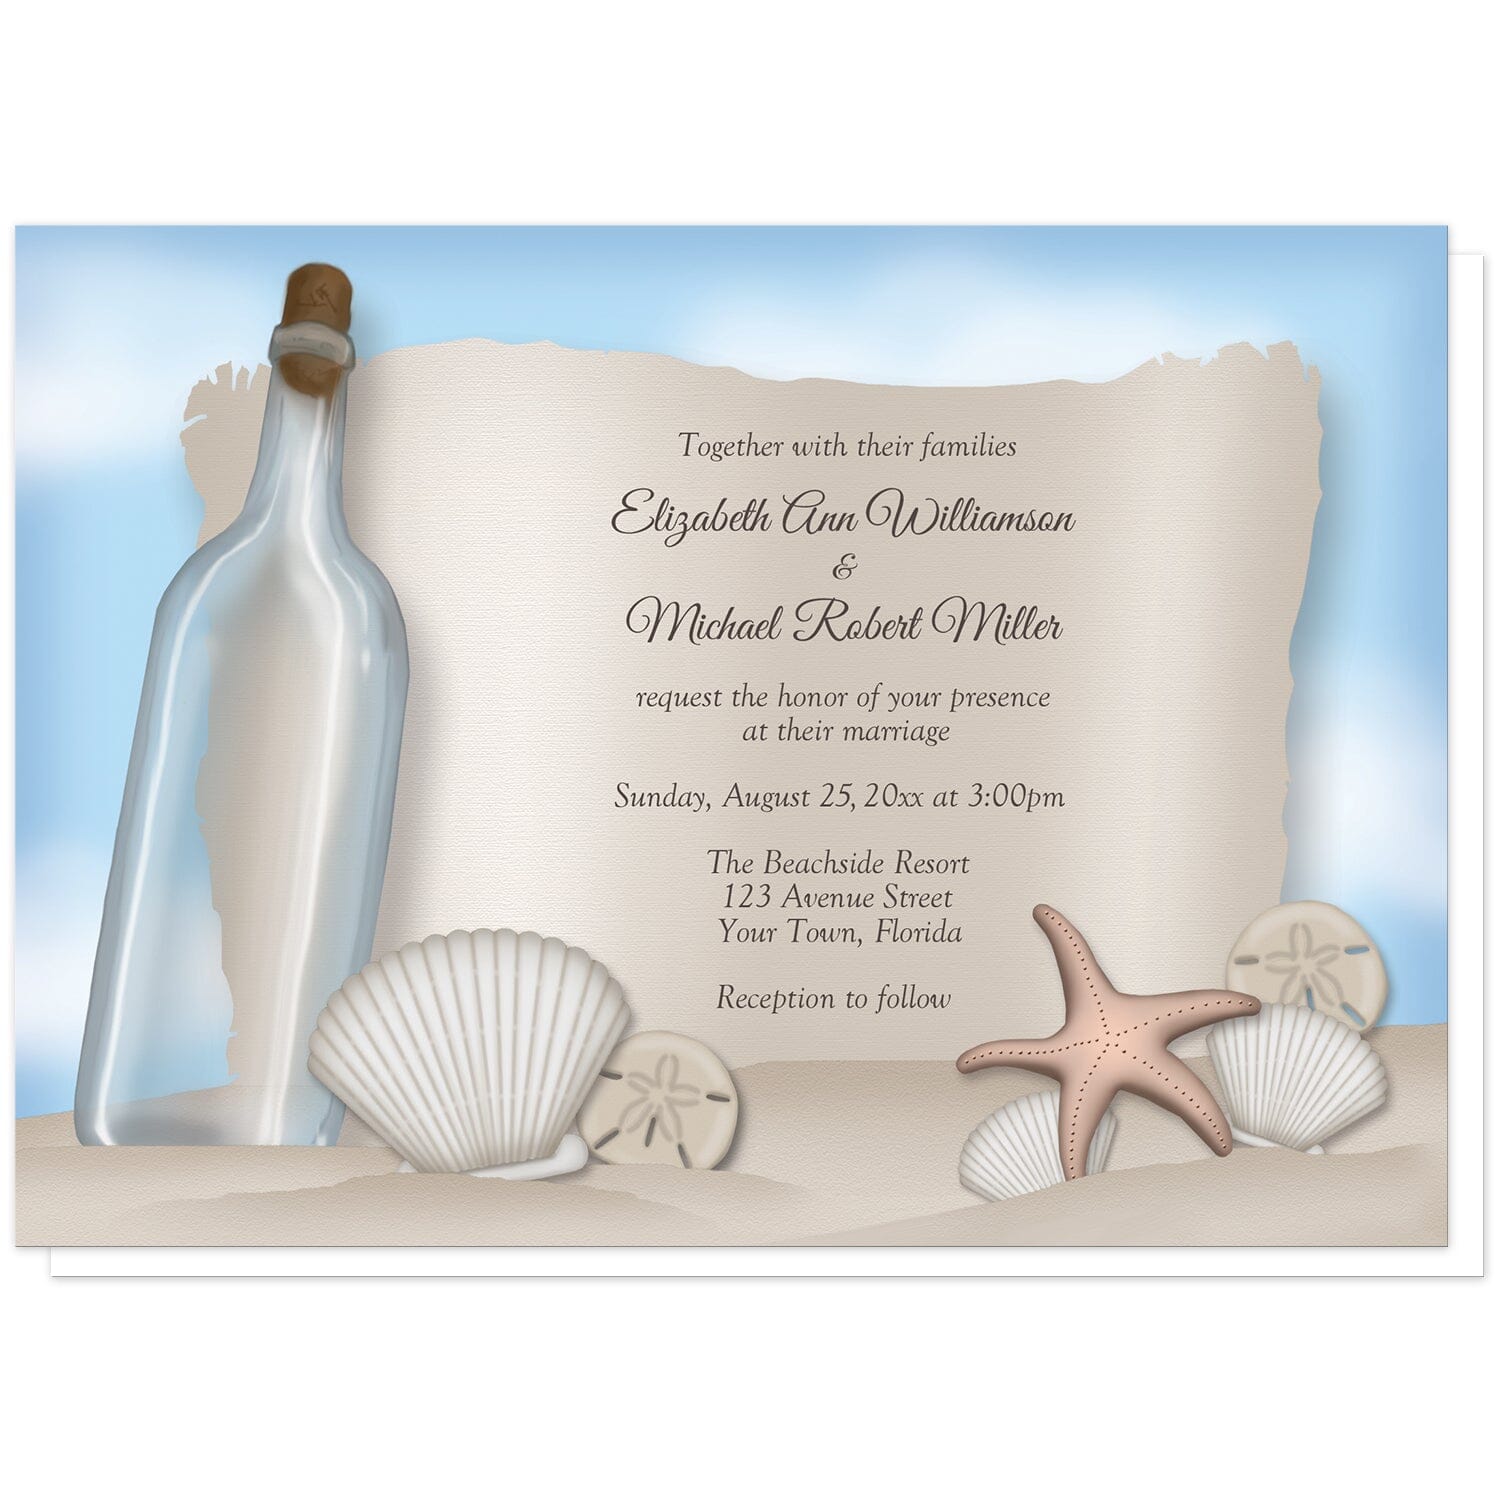 Message from a Bottle Beach Wedding Invitations at Artistically Invited. Message from a bottle beach wedding invitations with an "on the beach" and "message from a bottle" theme. They're designed with an illustrated empty glass bottle, a paper message area, beige sand, a blue sky, and assorted seashells. Your personalized marriage celebration details are custom printed in brown over the paper illustration.